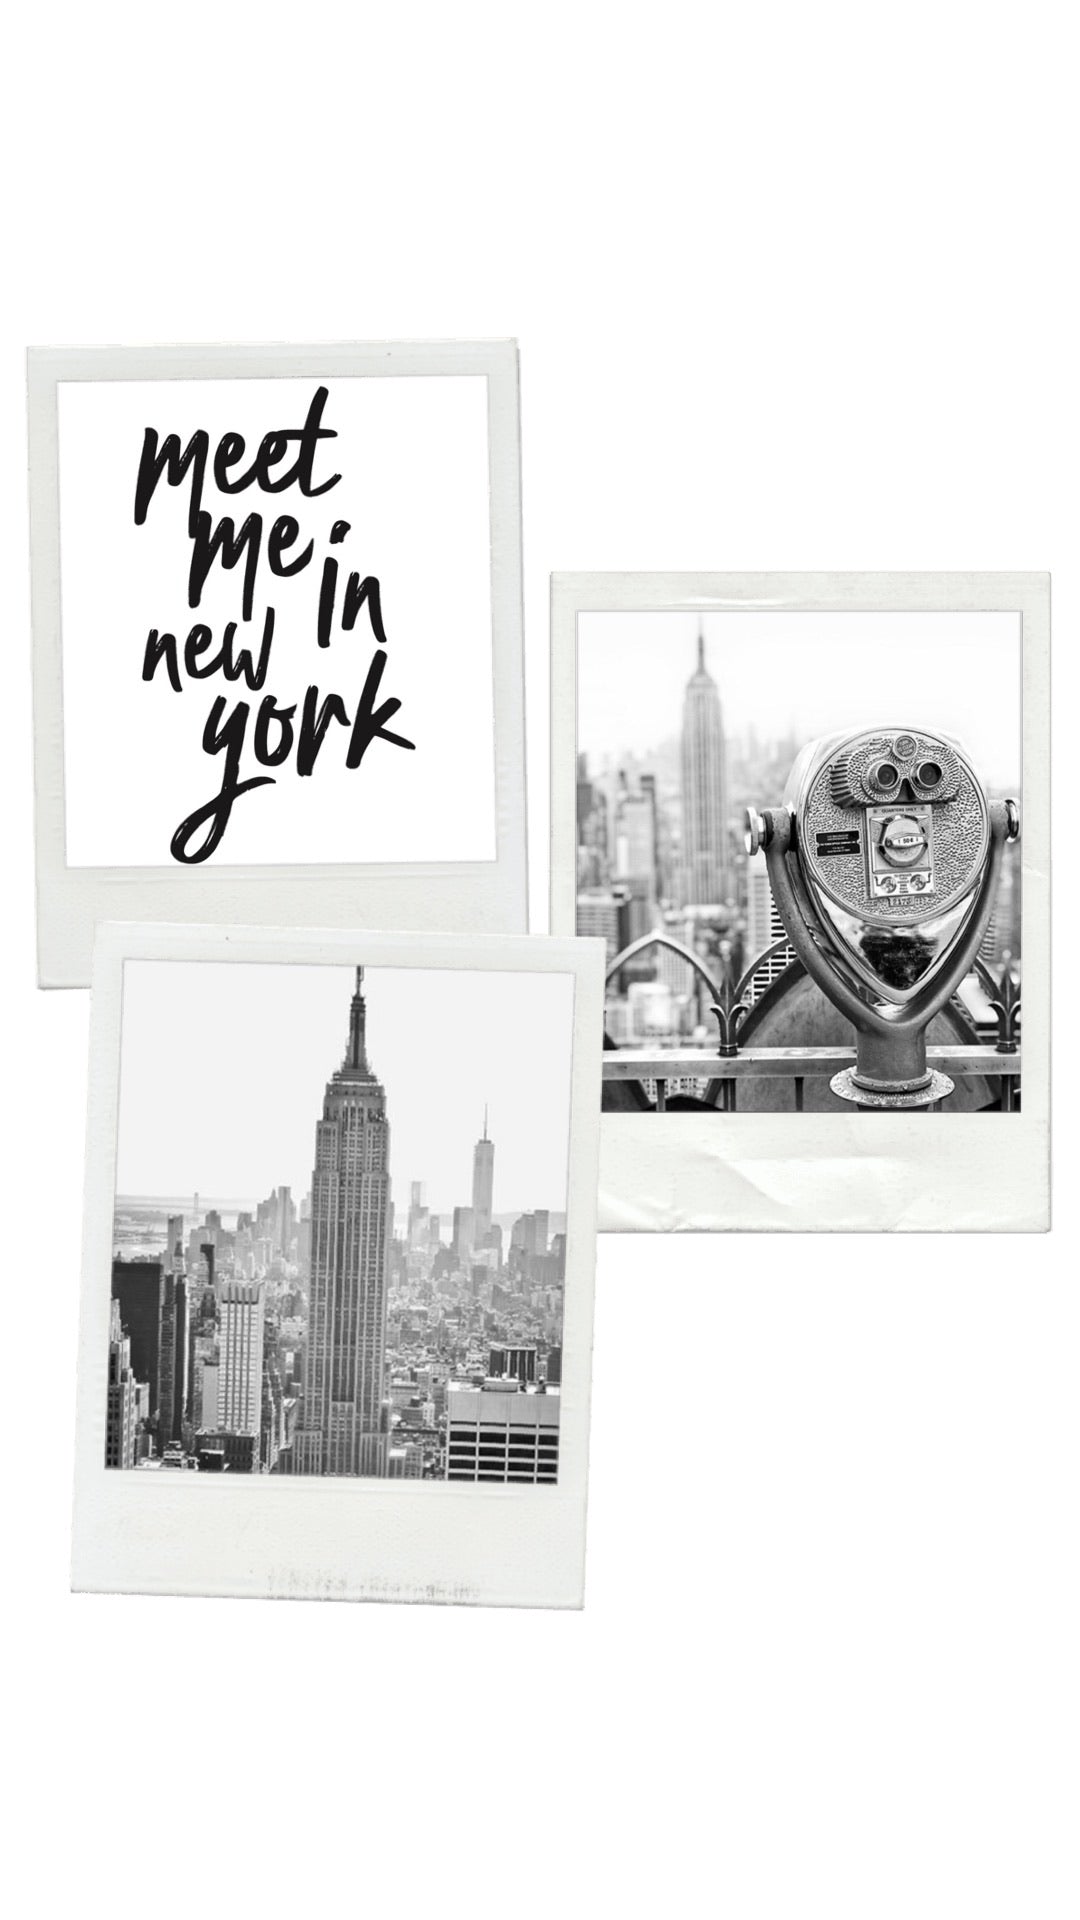 Meet me in New york - THE WALL STYLIST